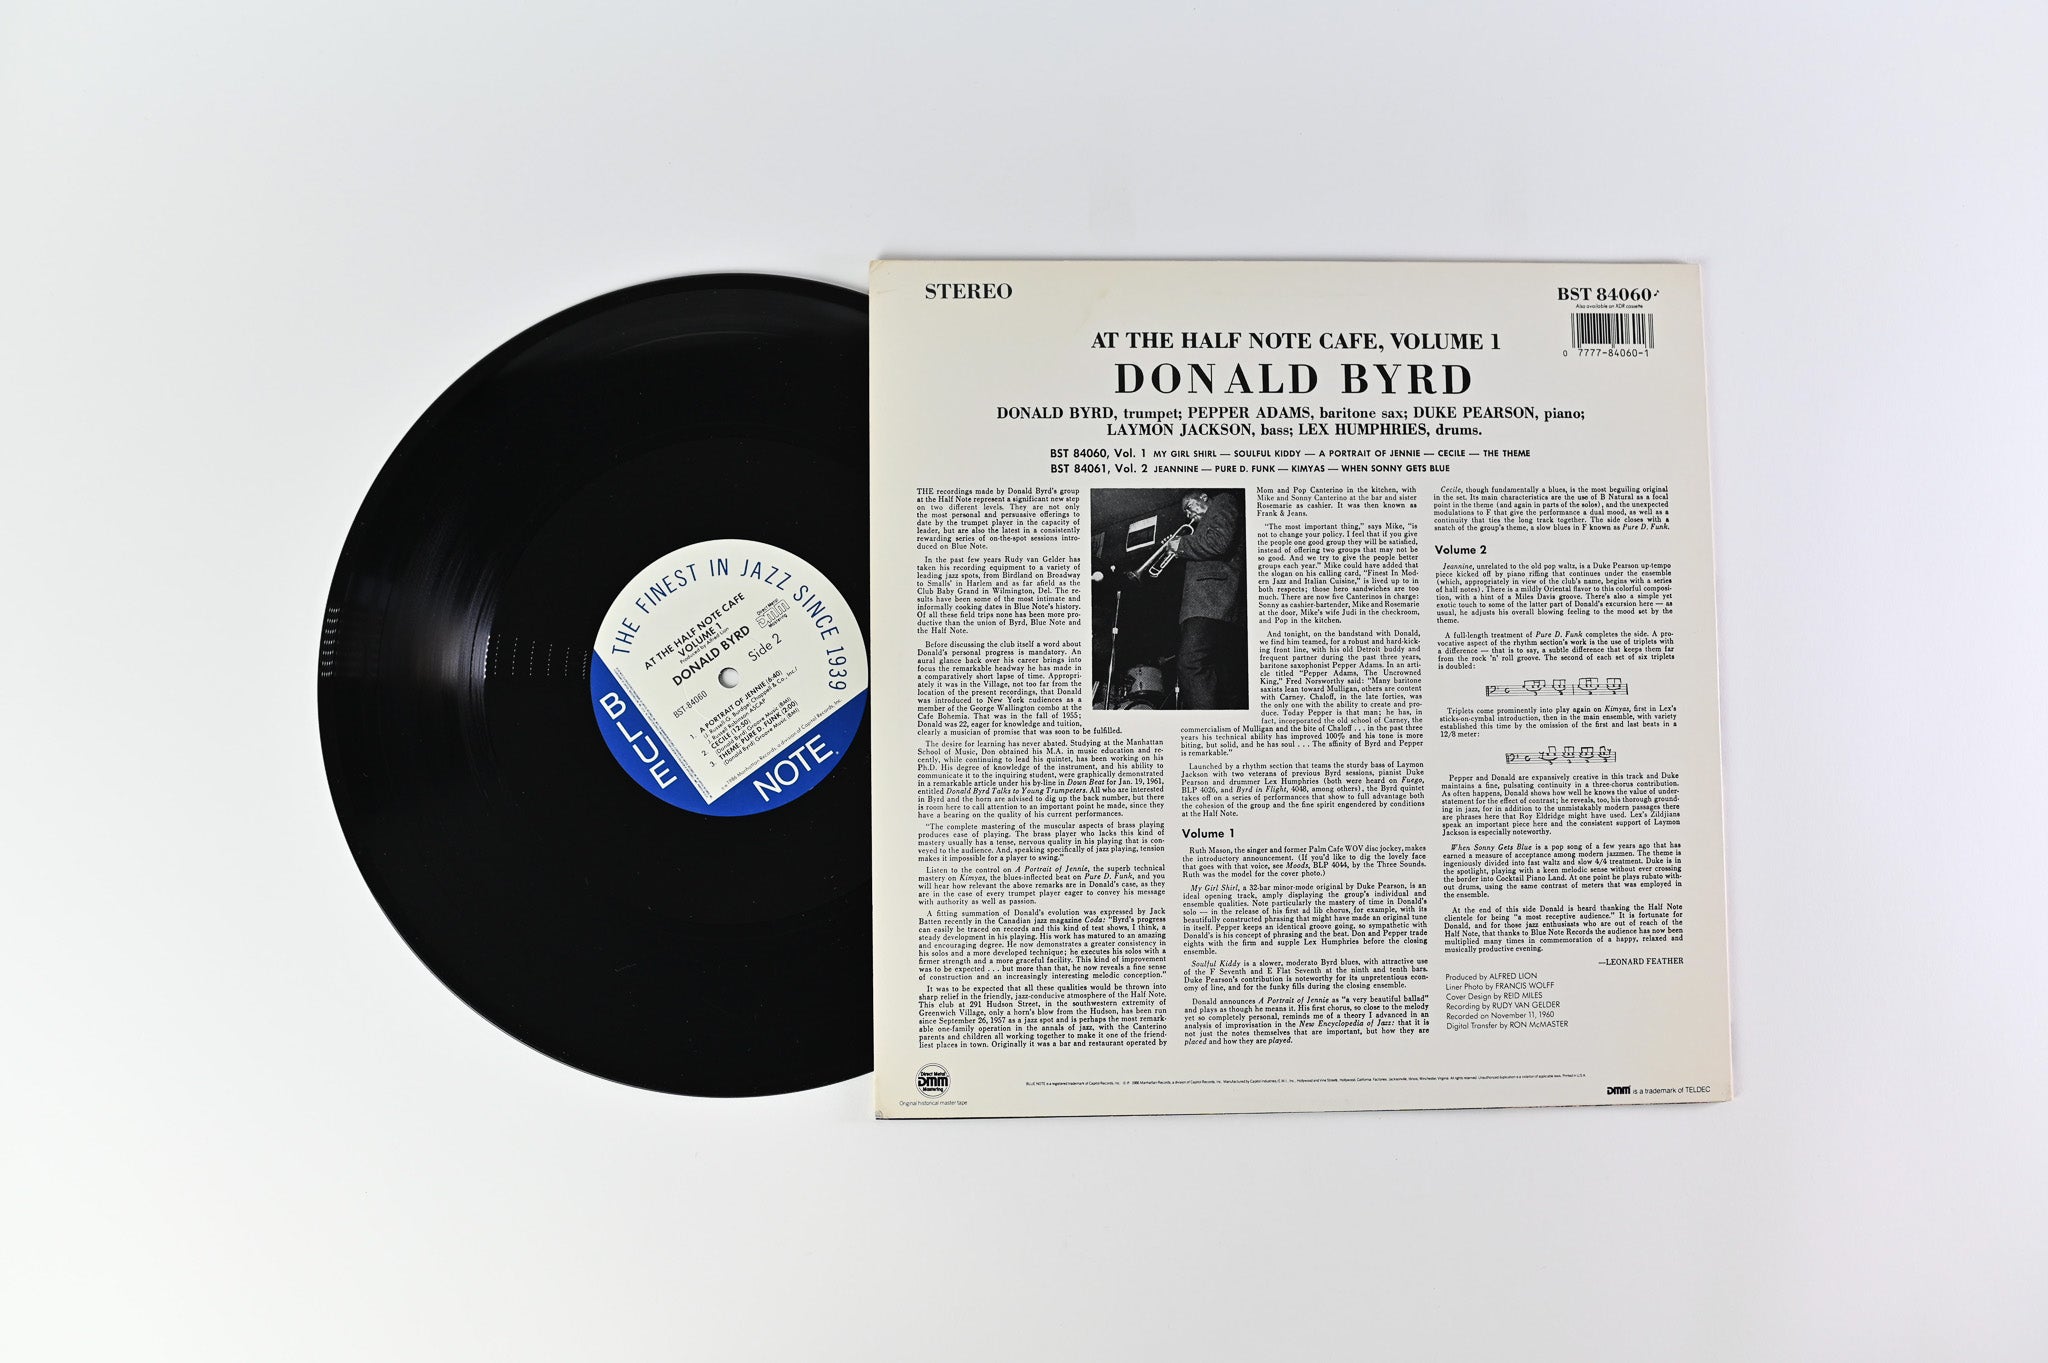 Donald Byrd - At The Half Note Cafe, Vol. 1 Reissue on Blue Note